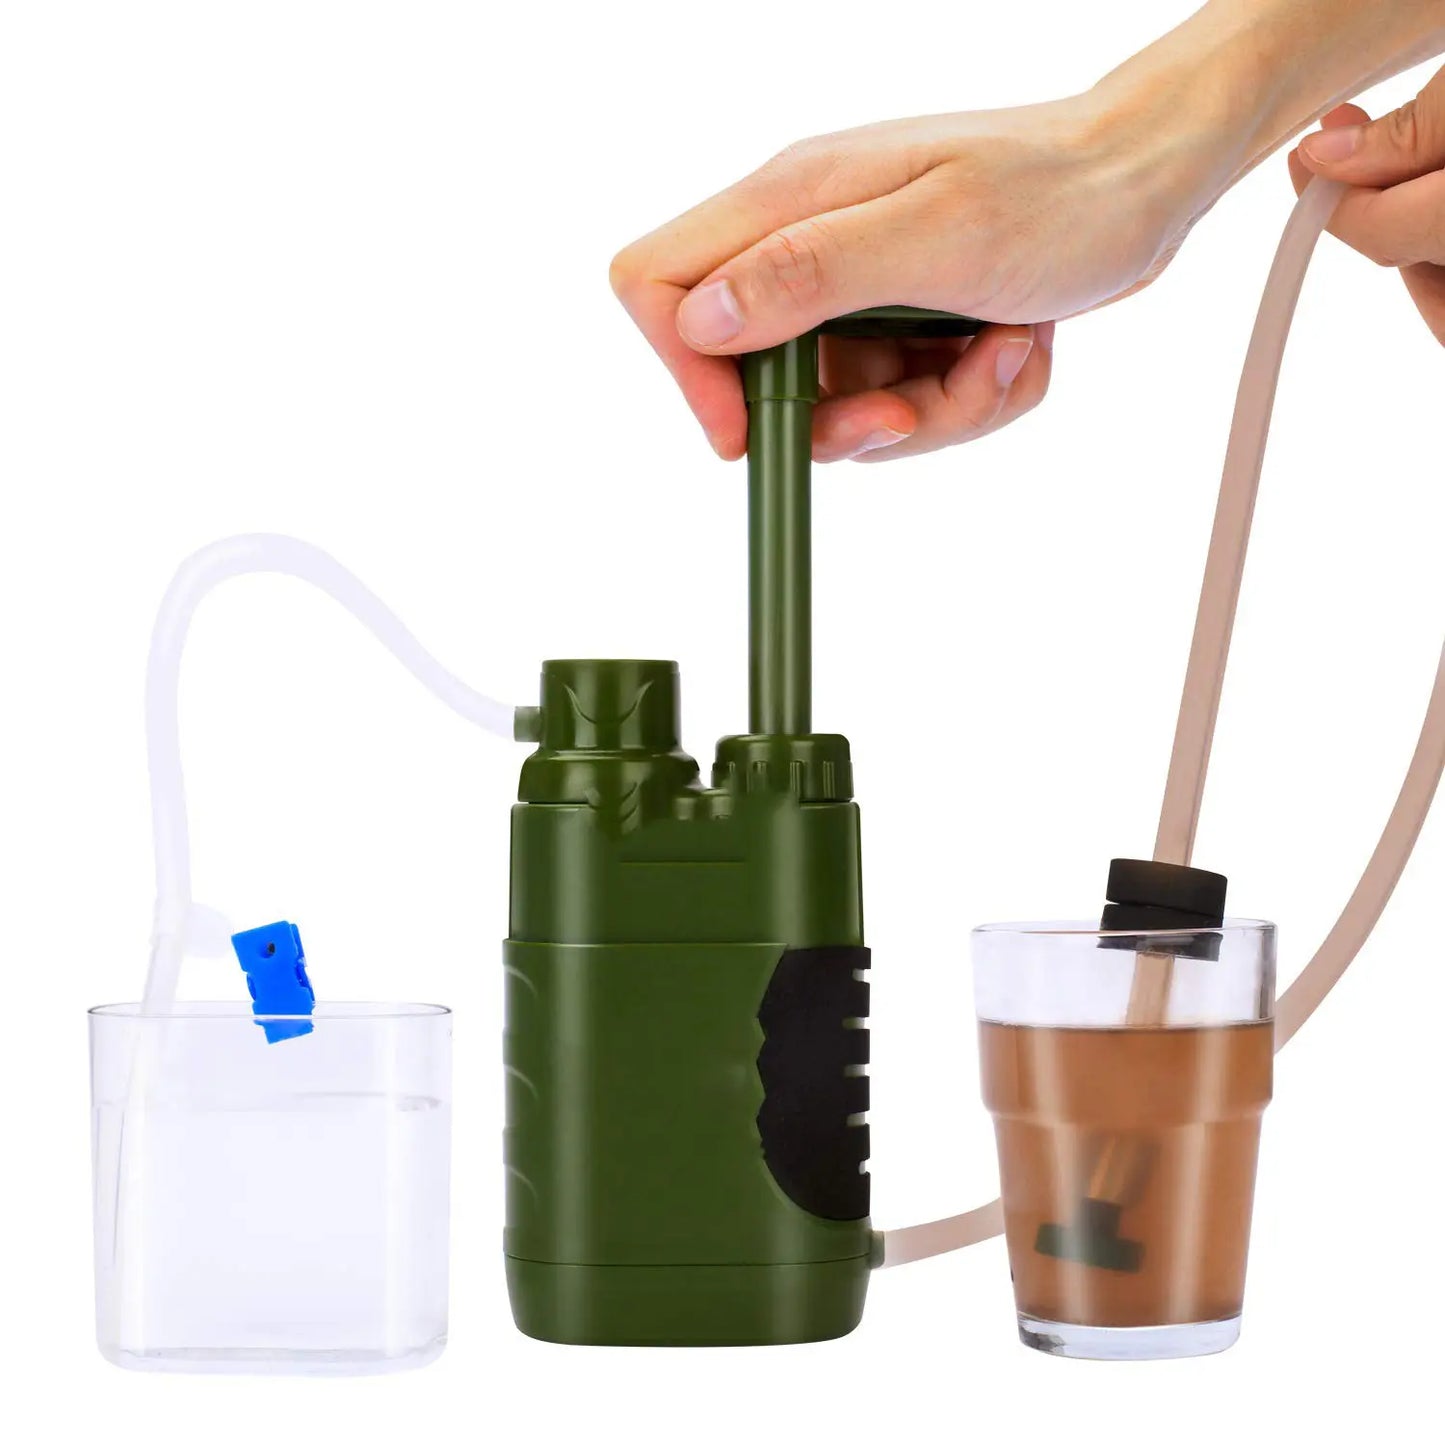 Purewell 380g Water Purifier Green - Hiking Backpack 